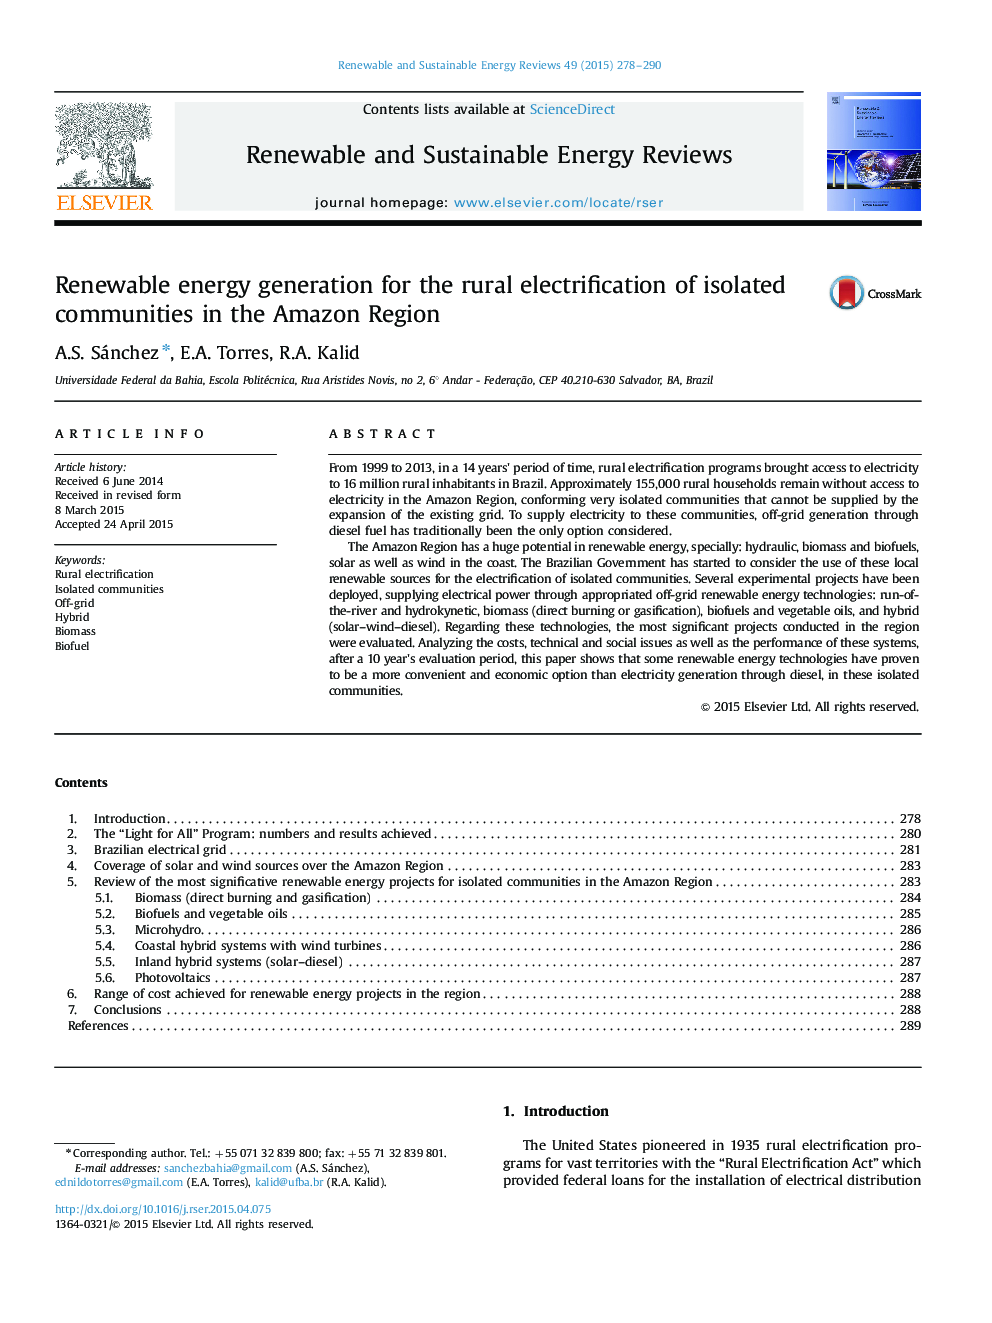 Renewable energy generation for the rural electrification of isolated communities in the Amazon Region